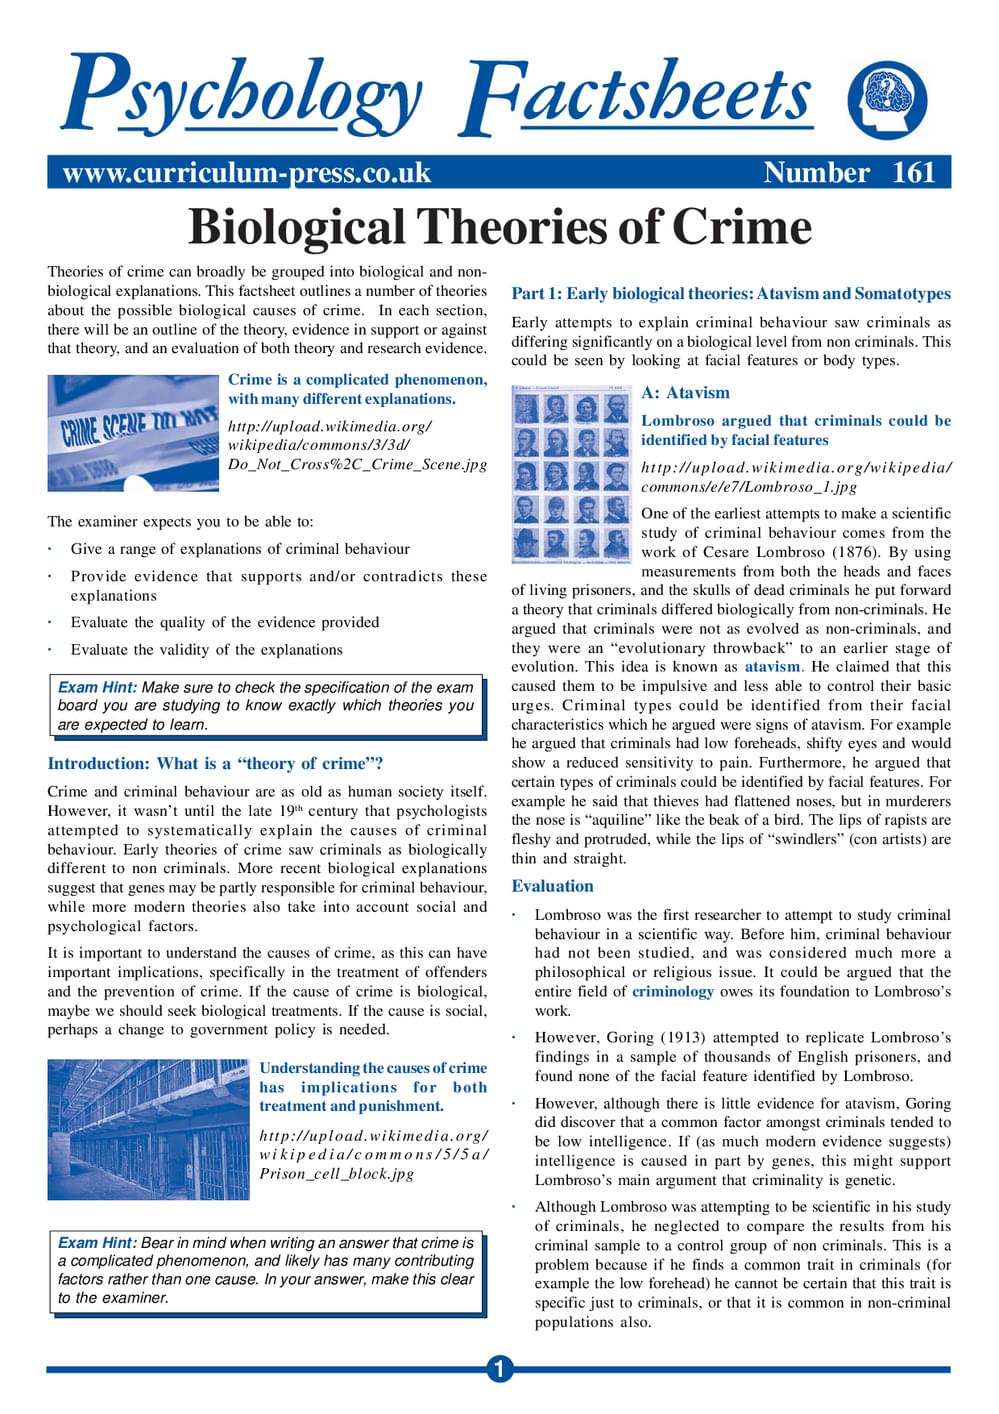 example of biological theory of crime